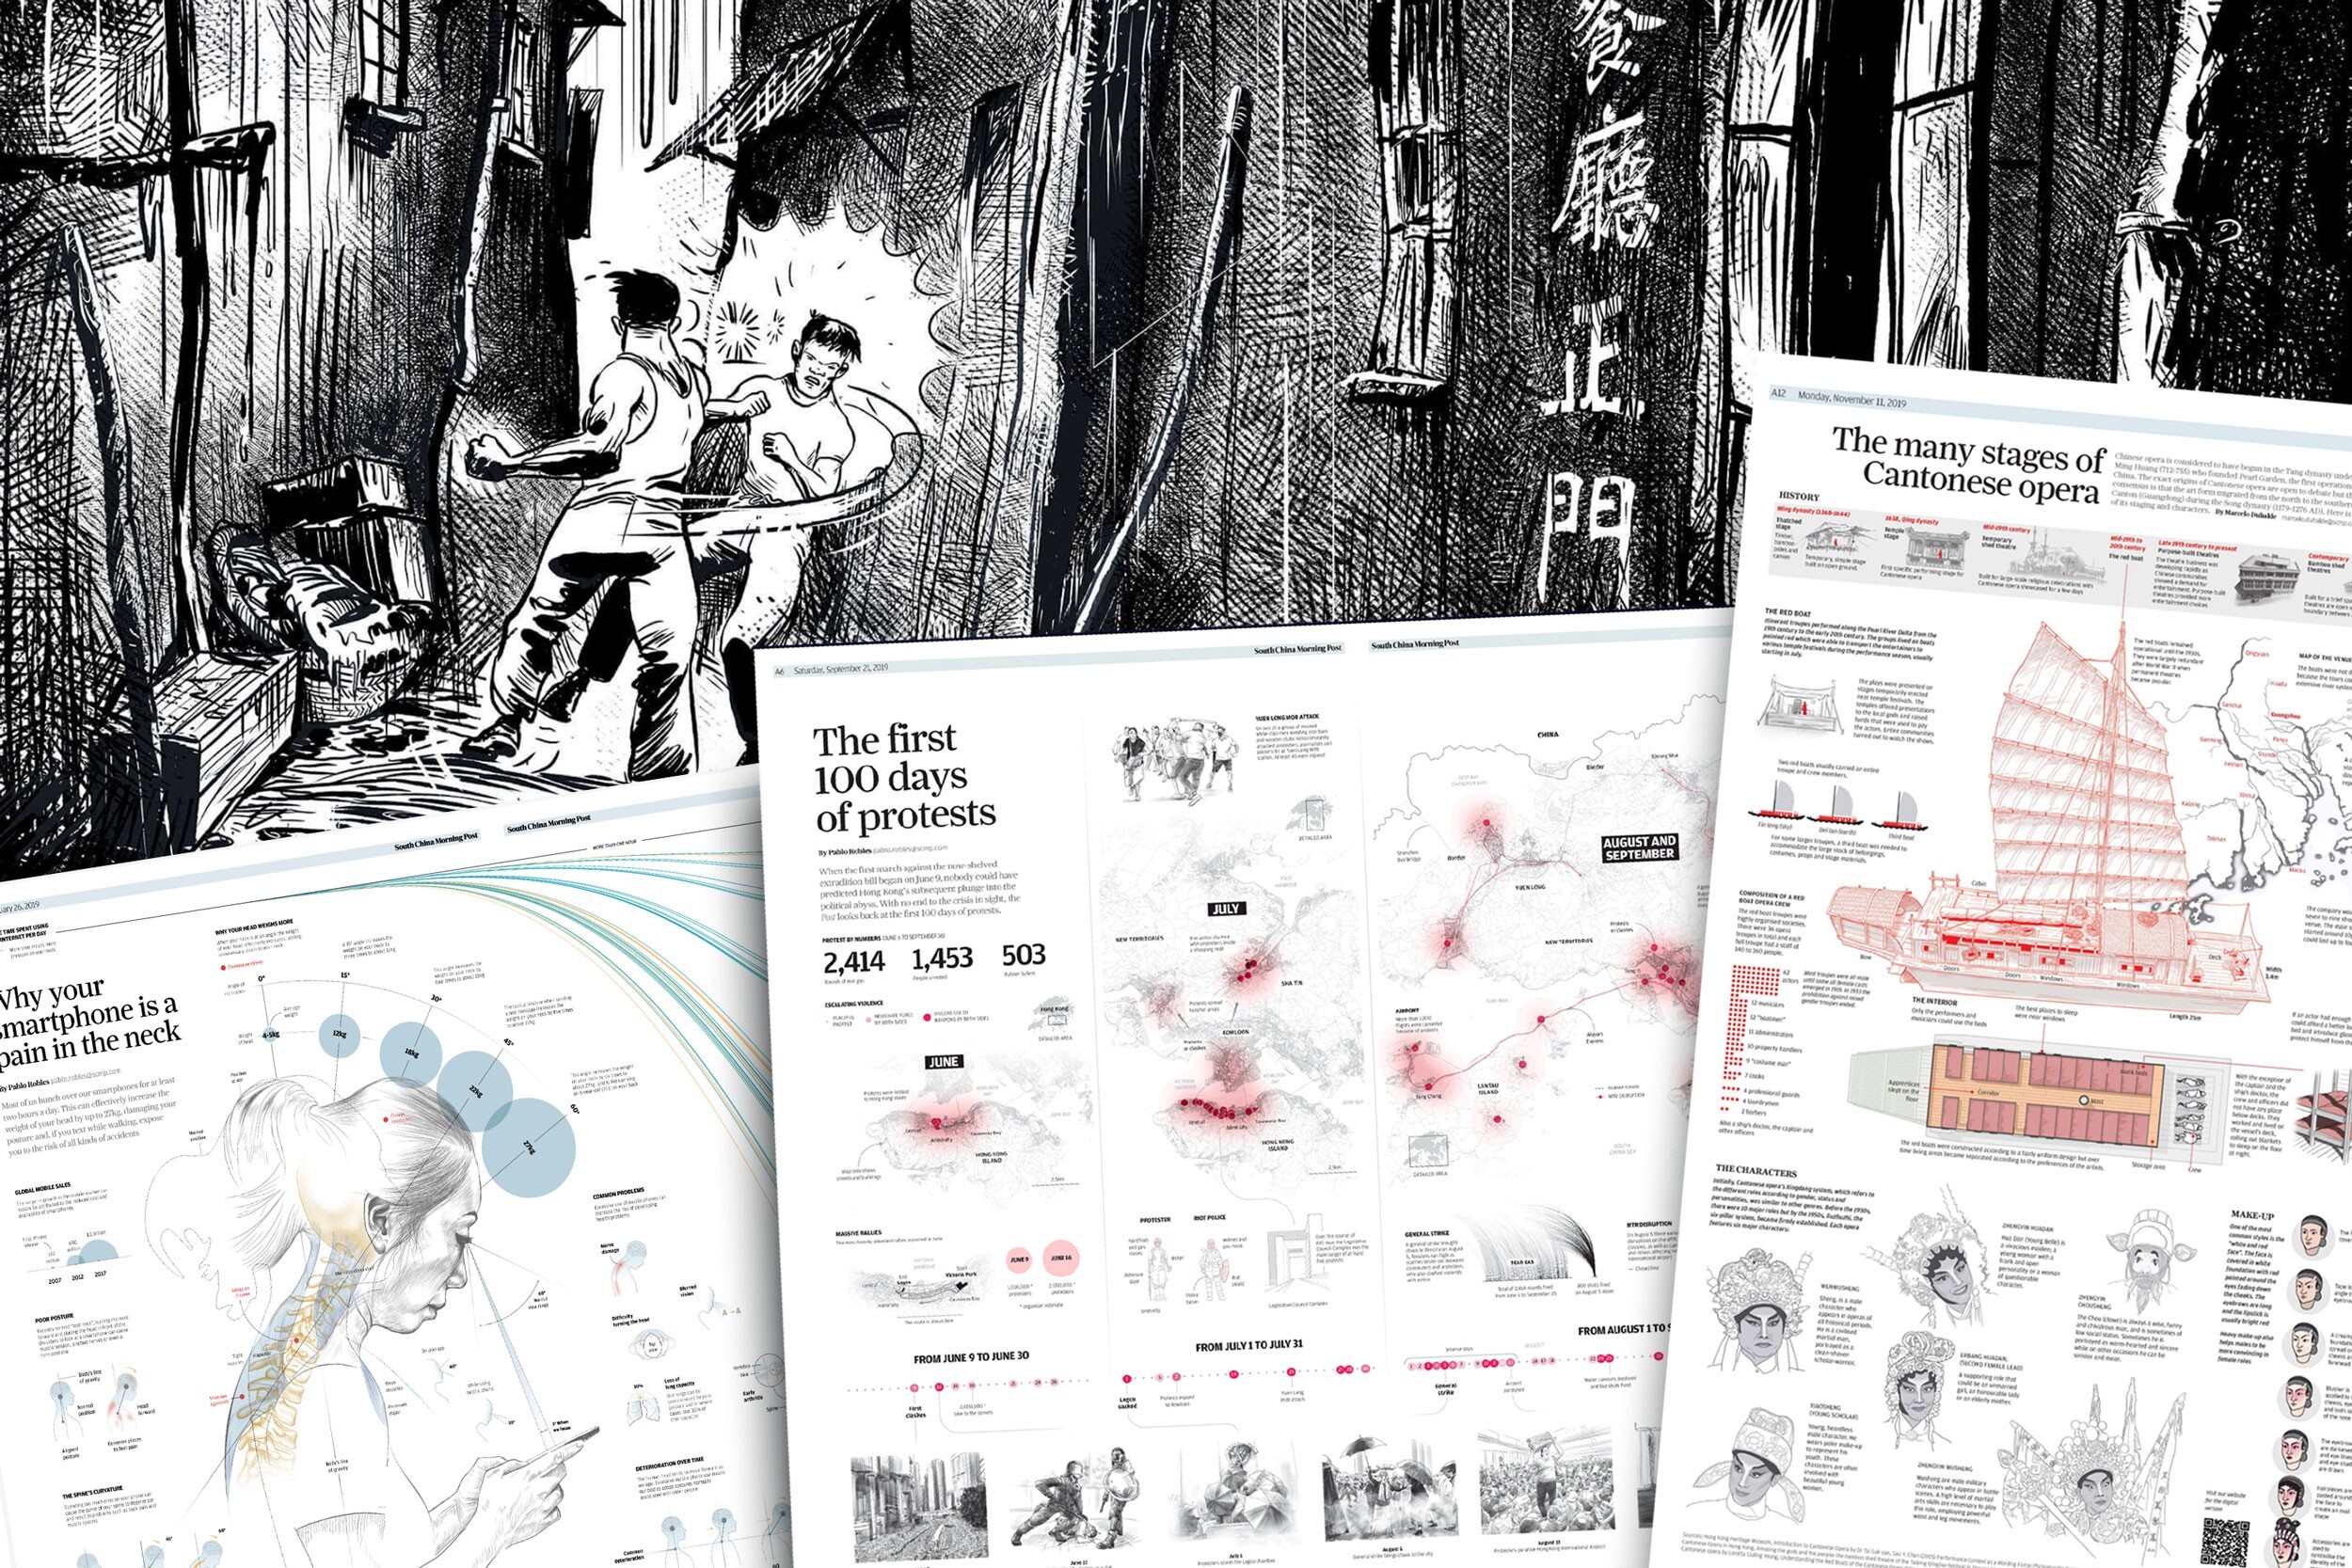 The South China Morning Post won the fourth most medals in the world for the digital competition and eighth for print.